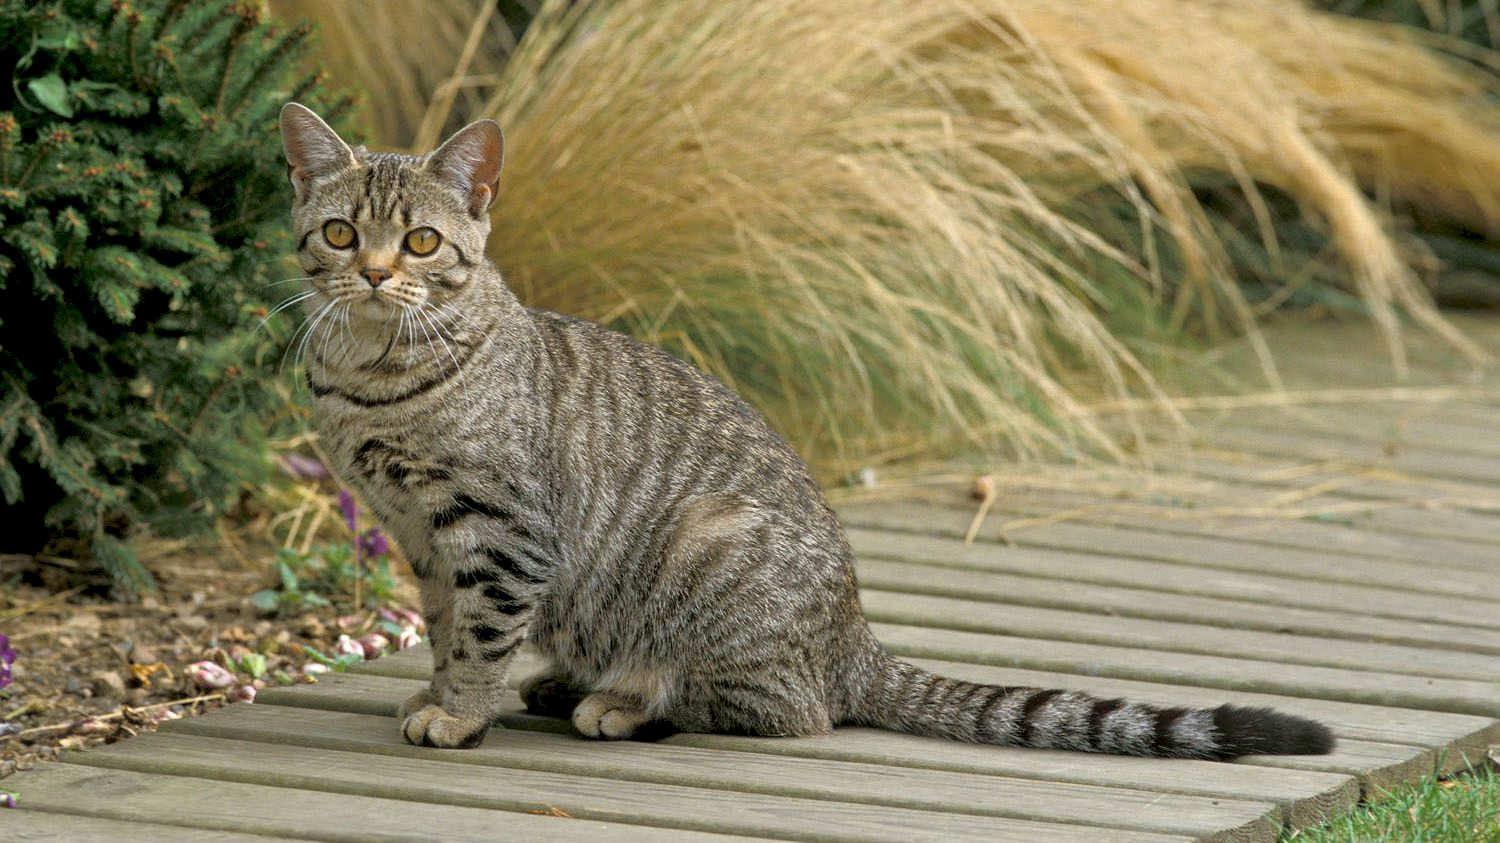 American Shorthair sitting on wooden walkway in front of long grasses